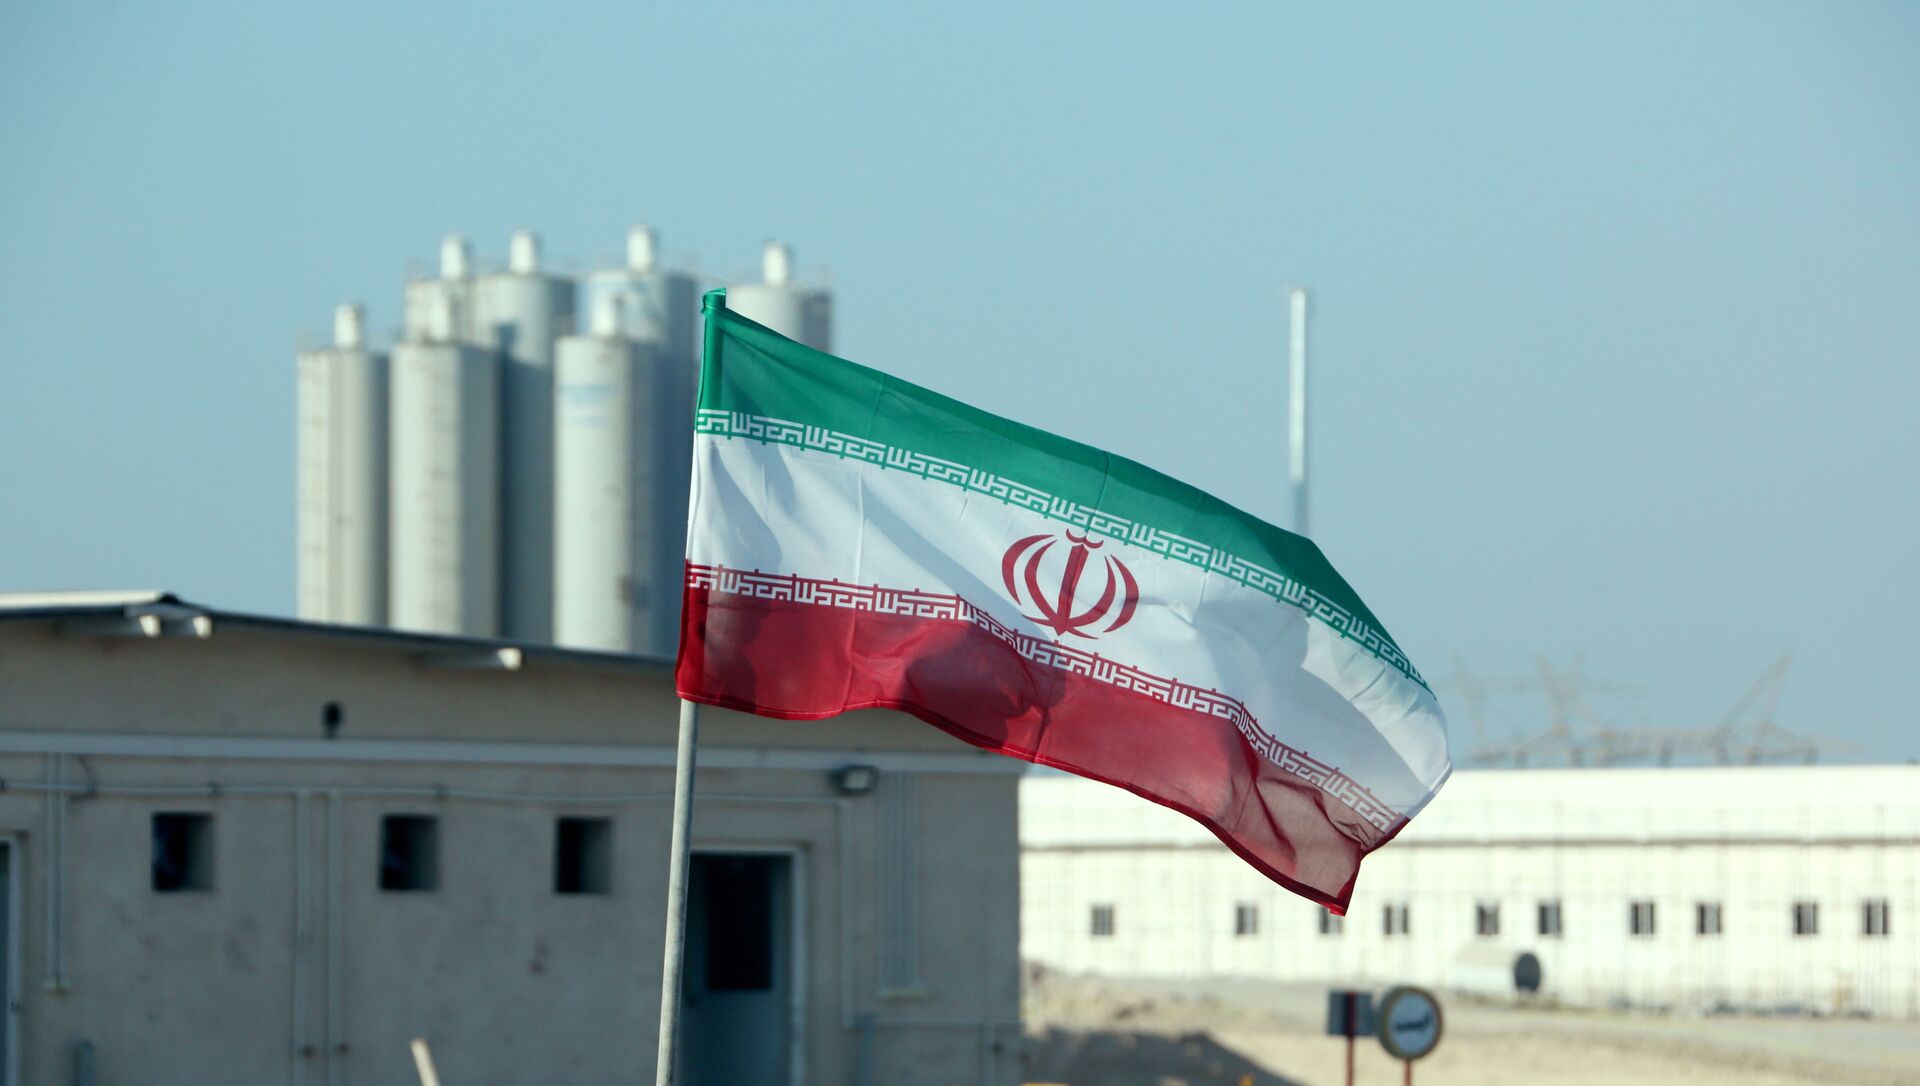 A picture taken on 10 November 2019, shows an Iranian flag at Iran's Bushehr nuclear power plant, during an official ceremony to kick-start works on a second reactor at the facility. Bushehr is Iran's only nuclear power station and is currently running on imported fuel from Russia that is closely monitored by the UN's International Atomic Energy Agency. - Sputnik International, 1920, 15.02.2021